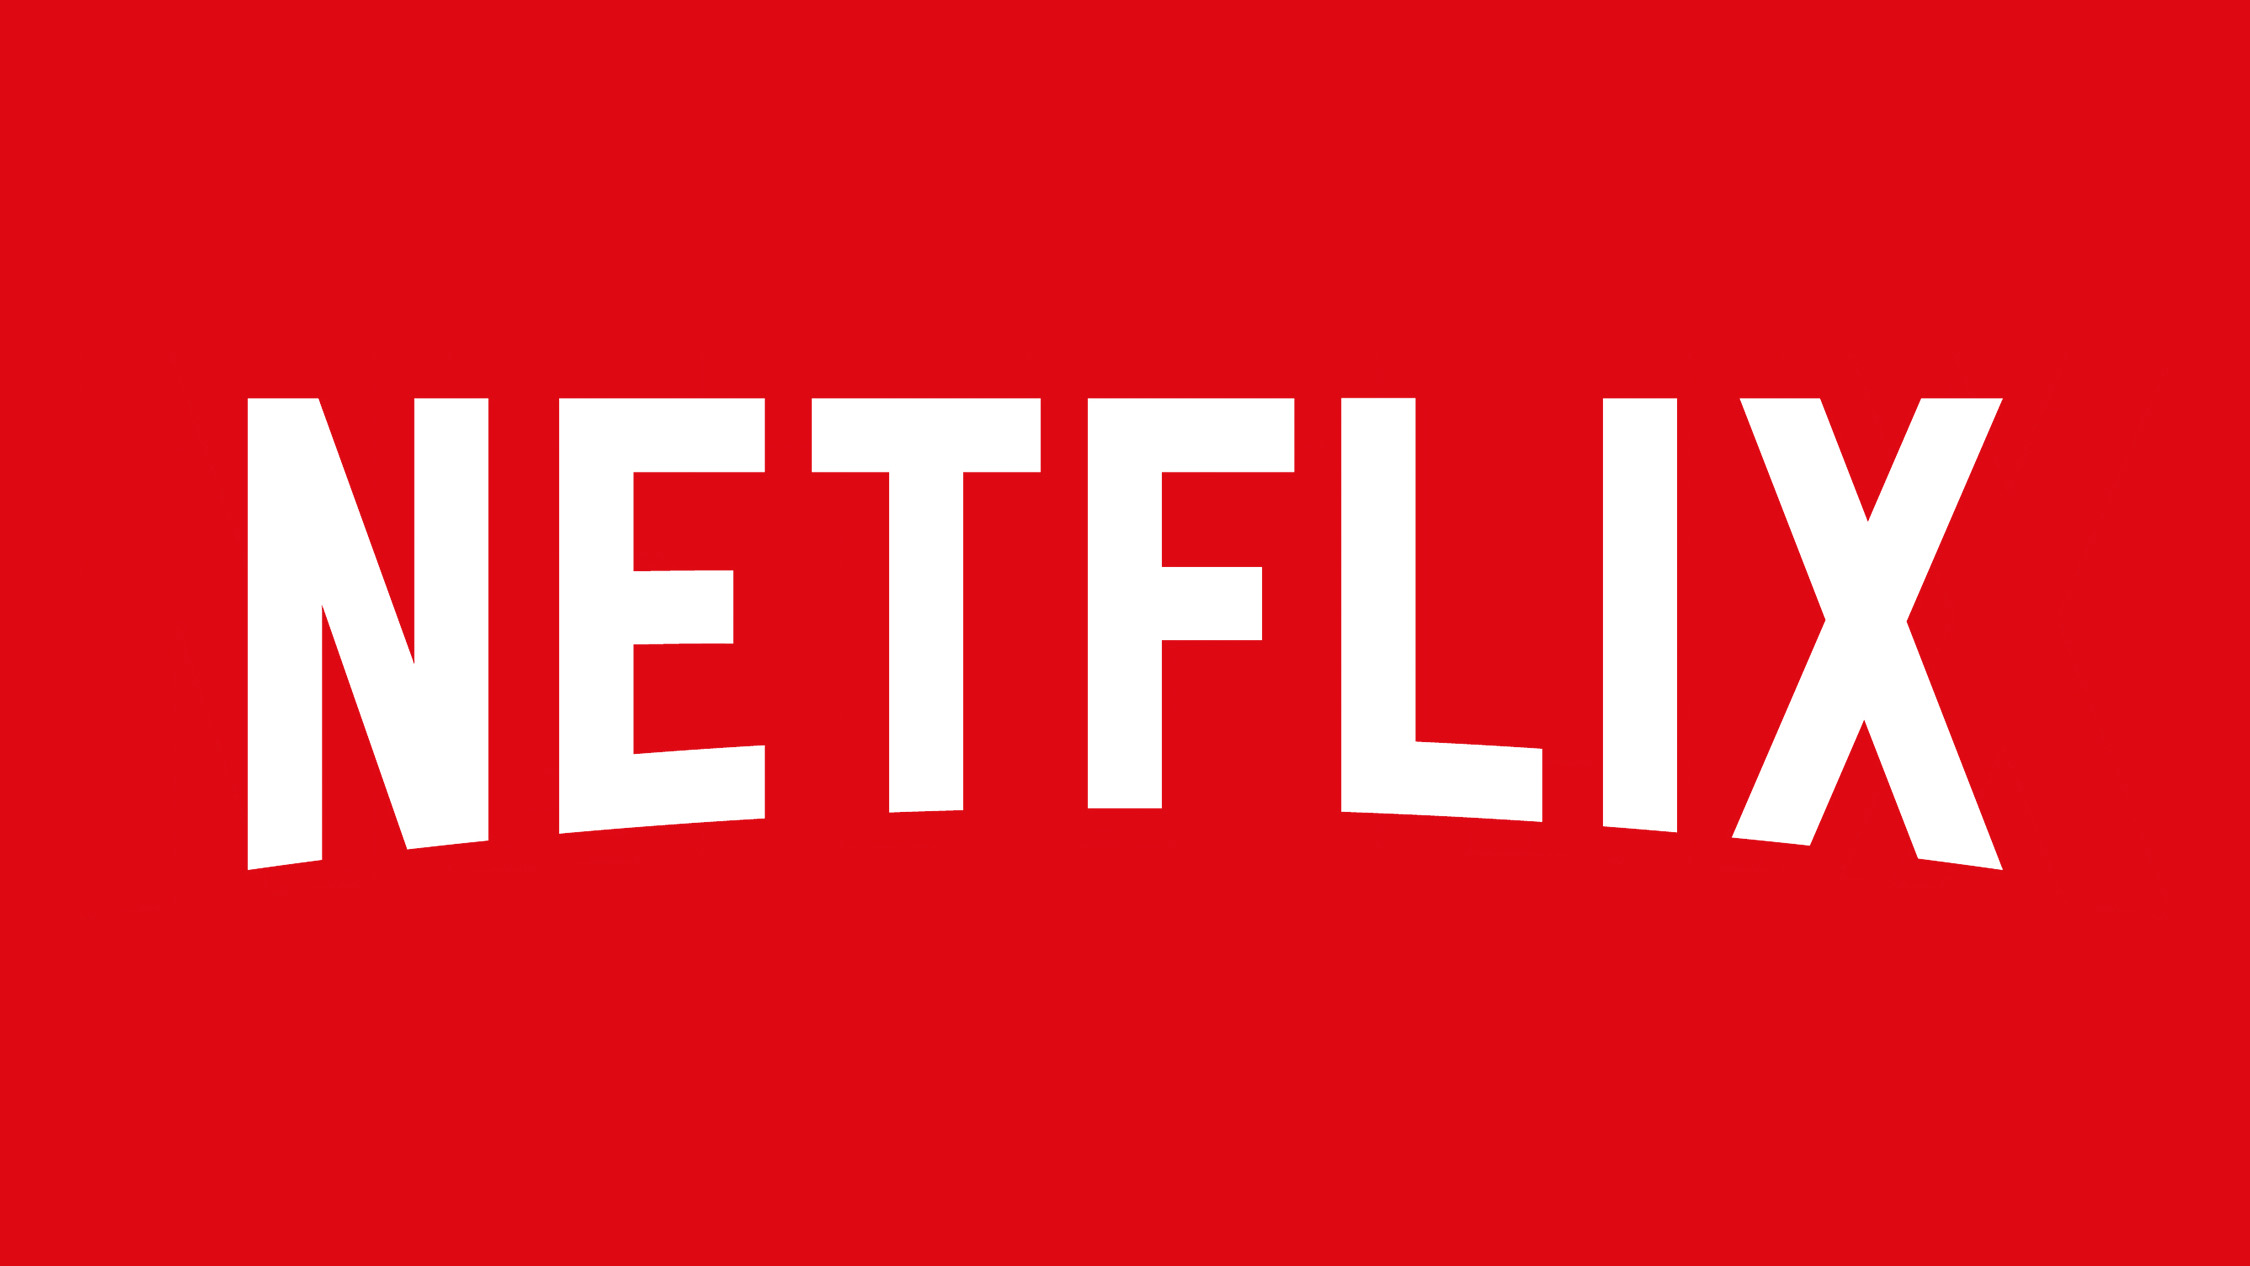 40 Million People Subscribe to Netflix’s Ad-Supported Tier